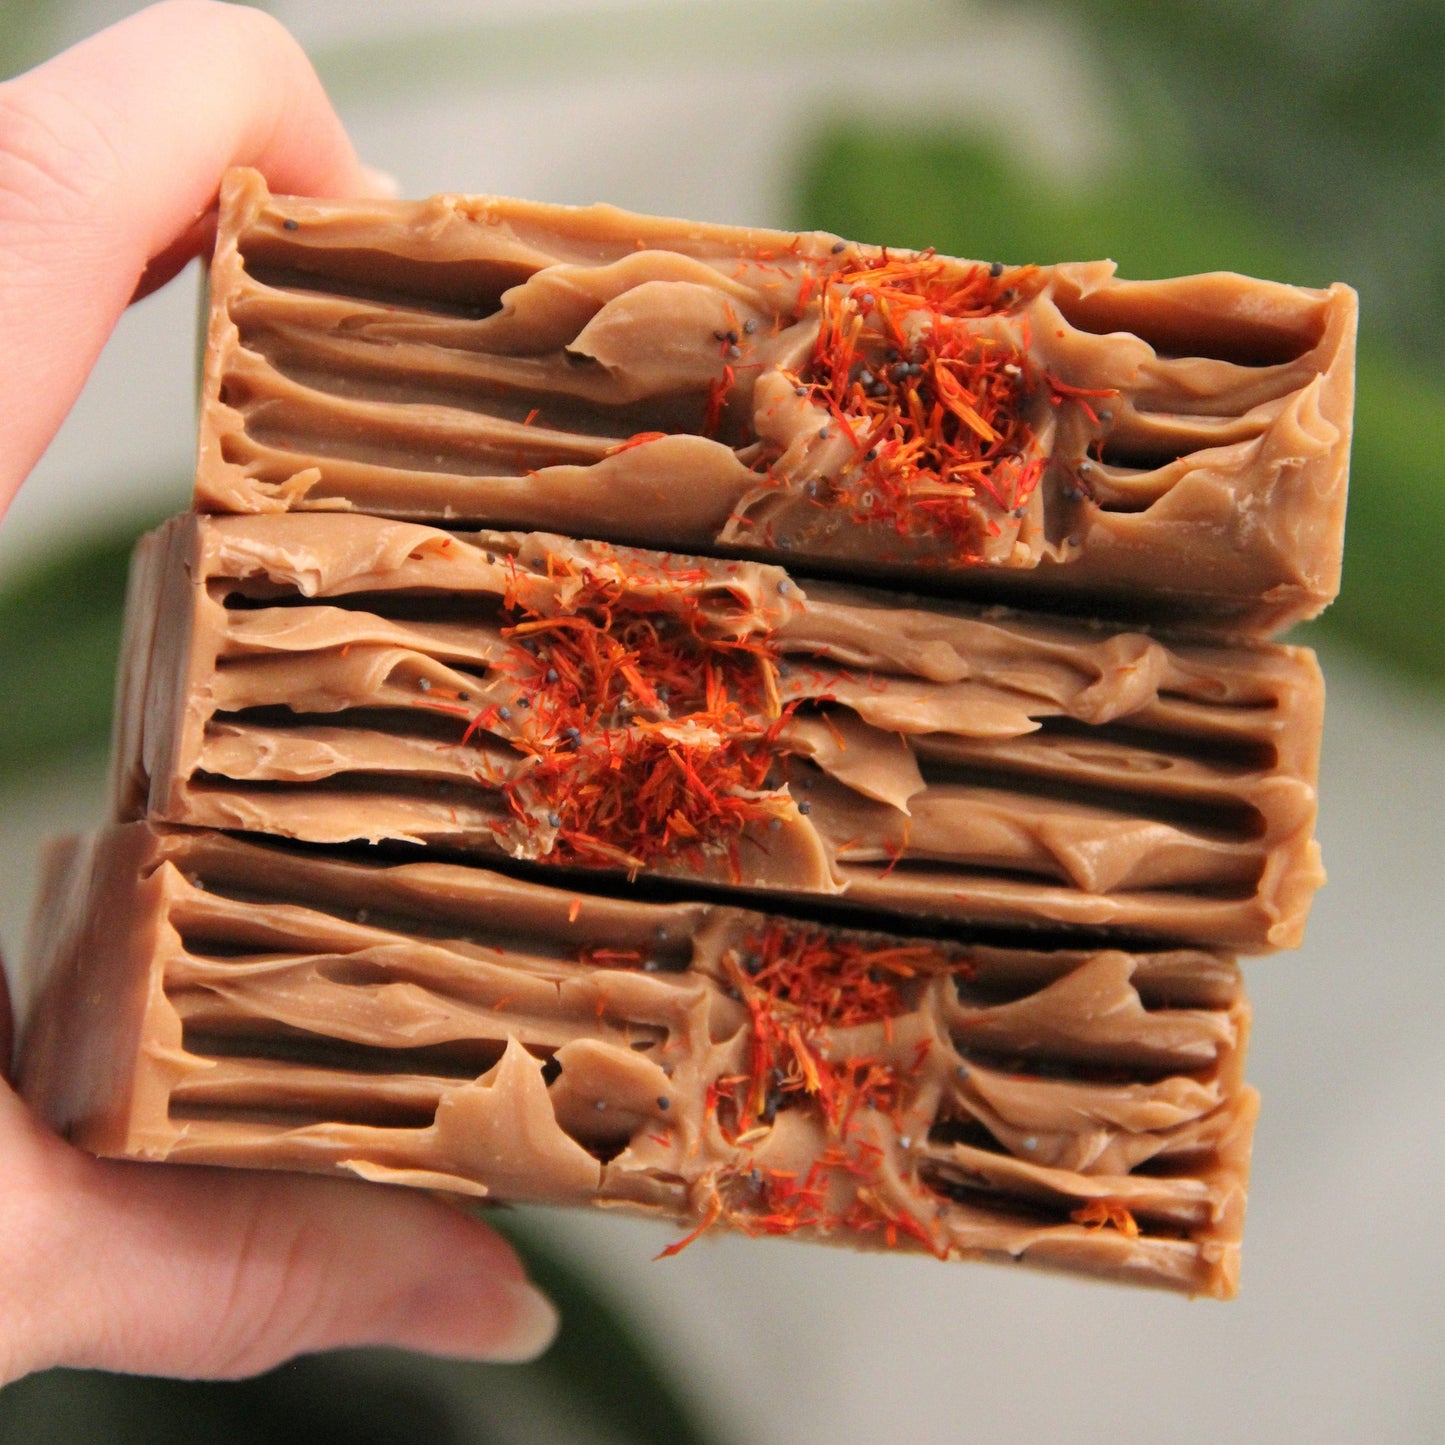 Specialty Pumpkin Spice Soap Making Class October 1st 2:00 pm- Made with real pumpkin puree